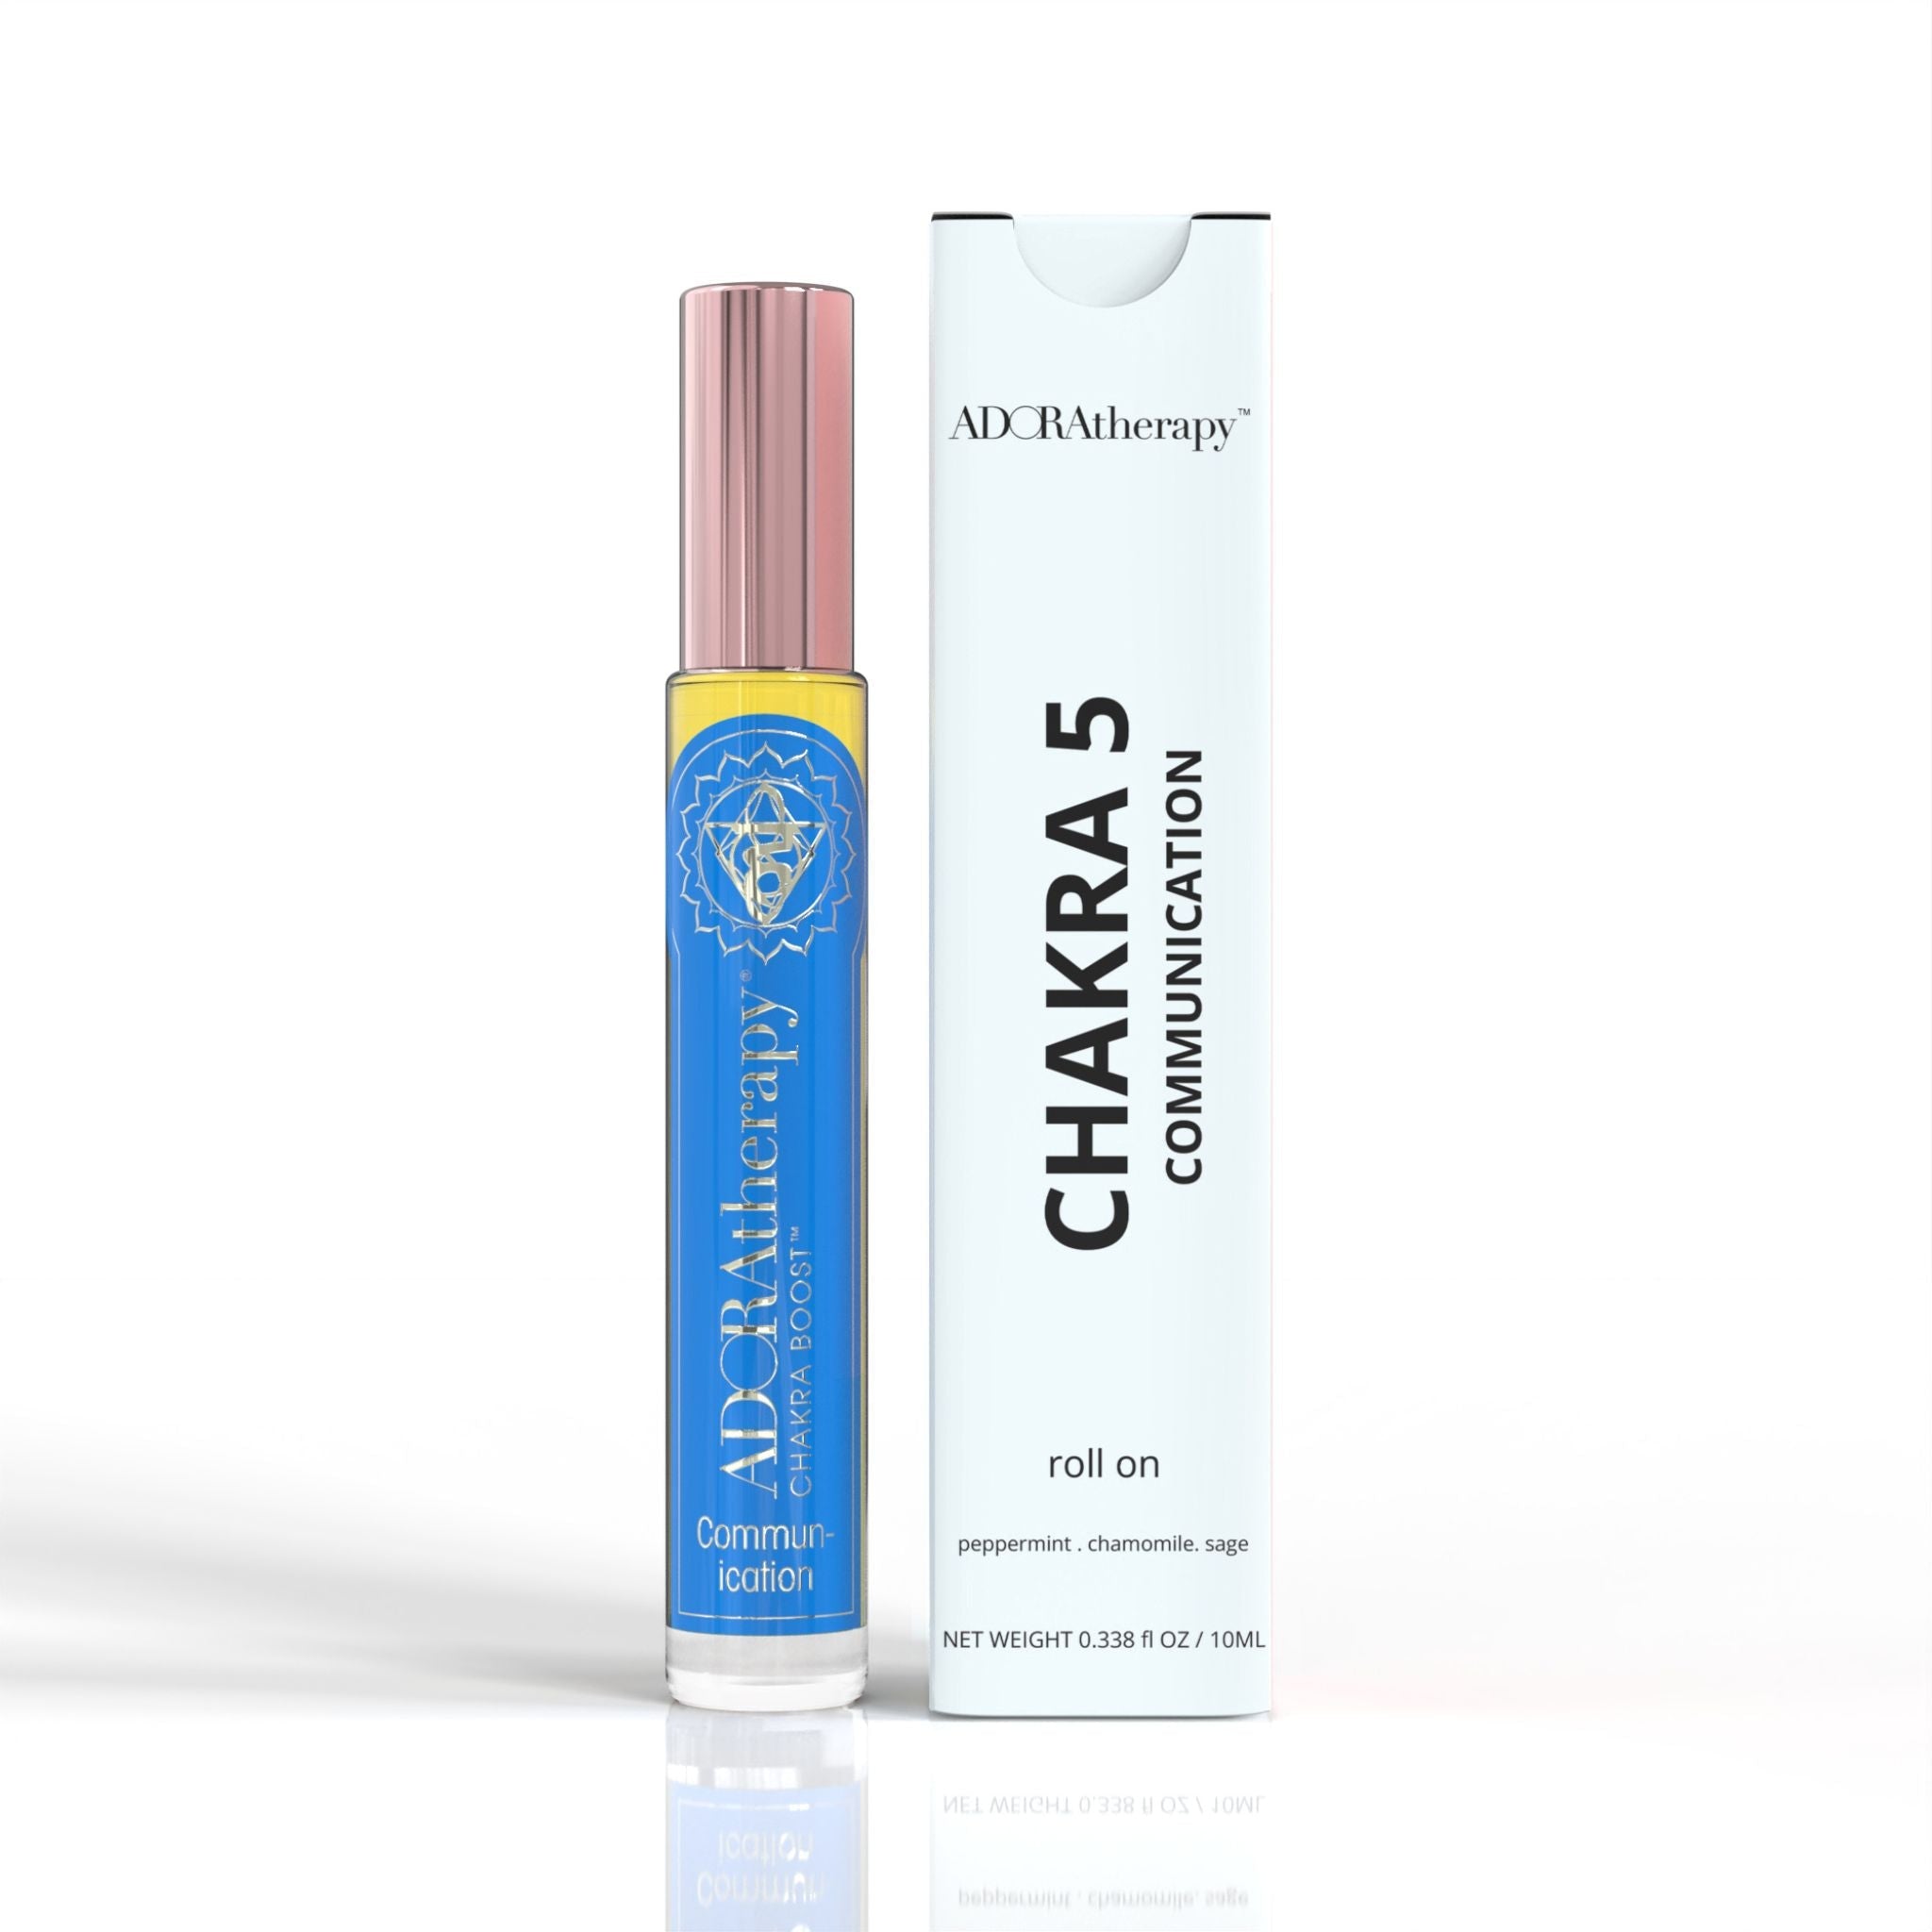 Chakra 5 Communication Roll On Perfume Oil by Adoratherapy.com